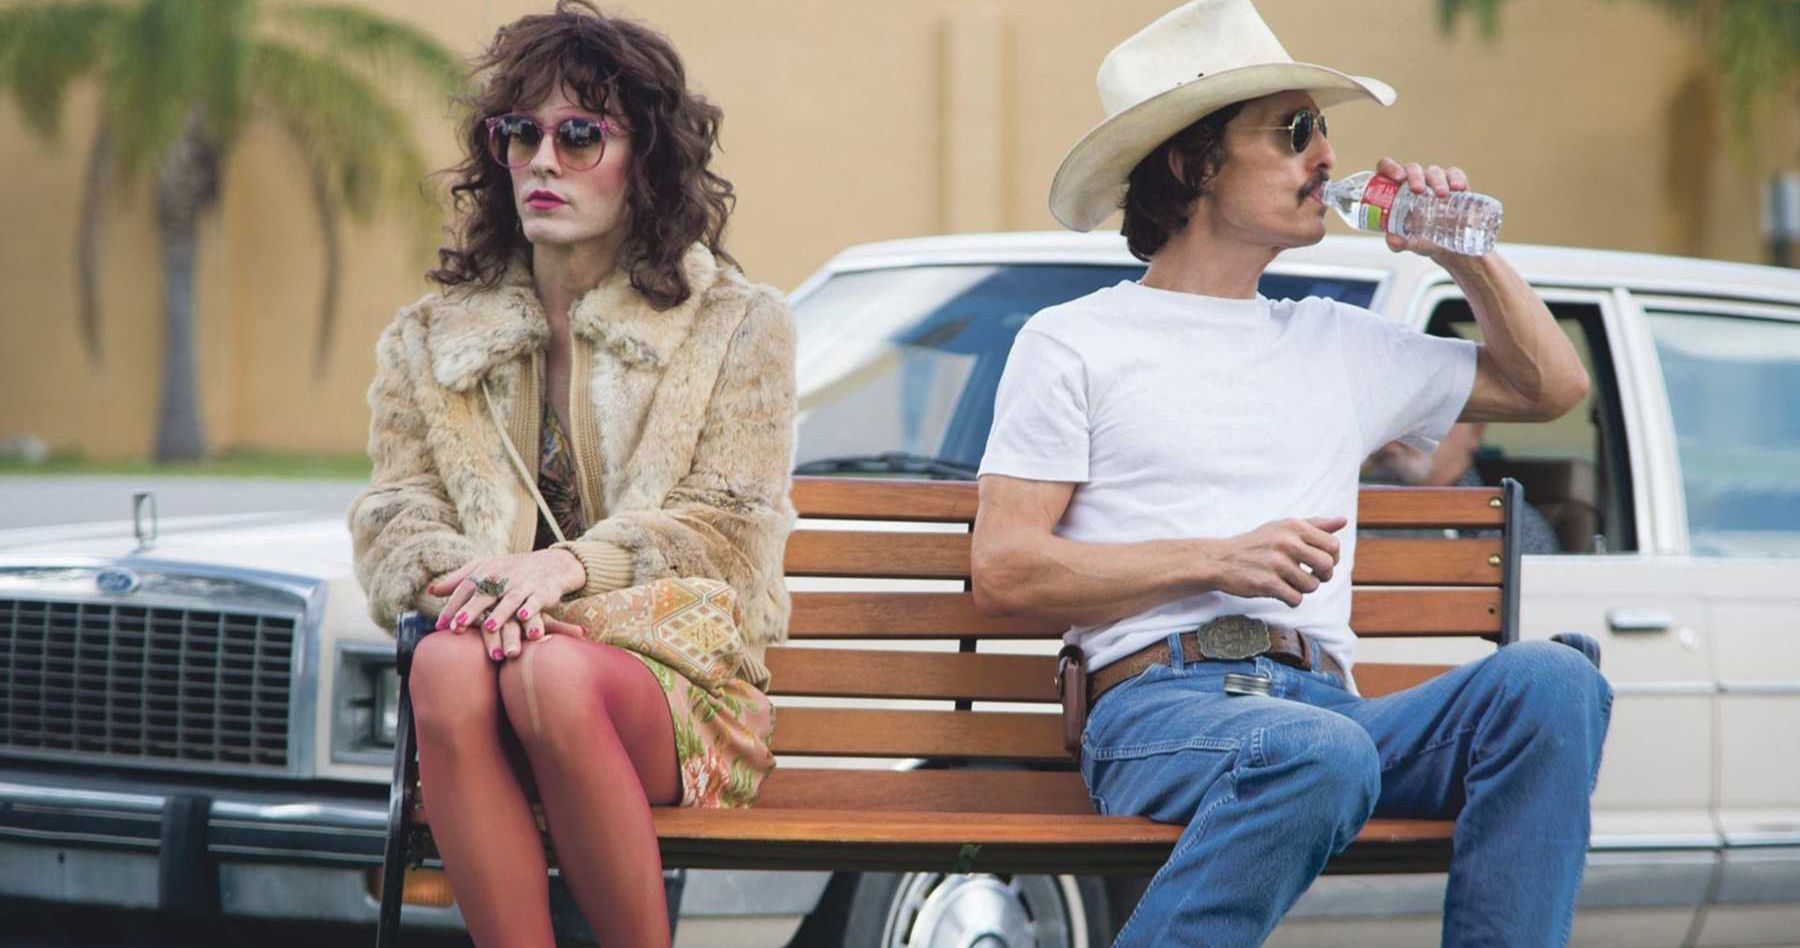 Jared Leto's Dallas Buyers Club Oscar Has Been Missing for Three Years